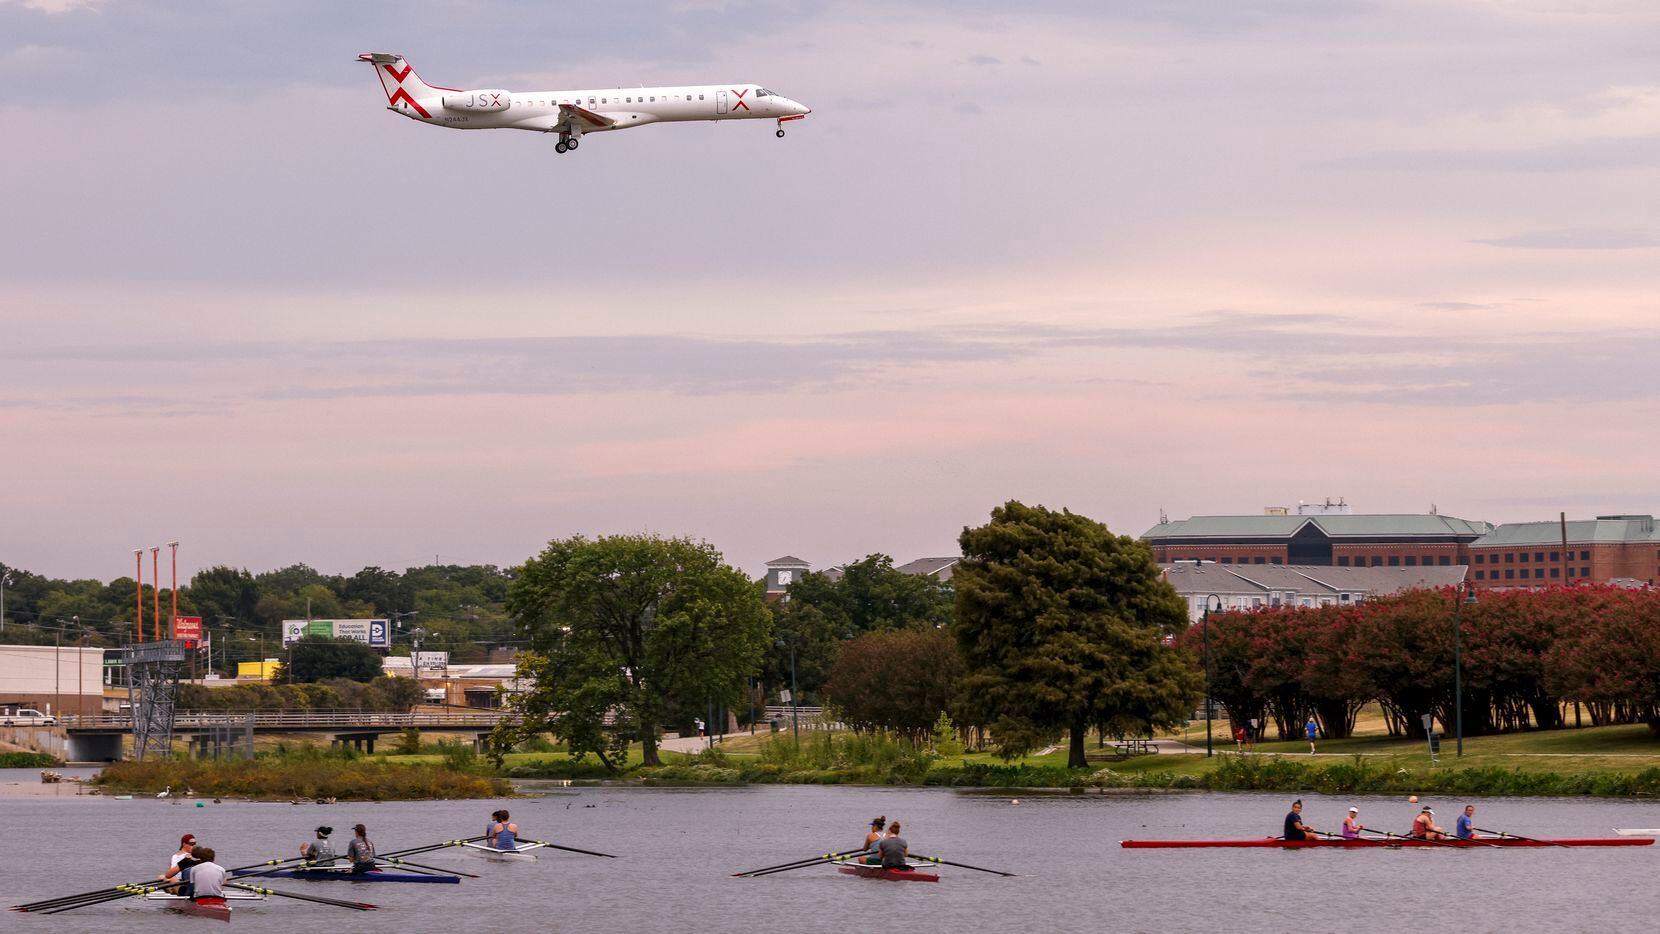 A jet flies over Bachman Lake as it prepares to land at Dallas Love Field airport on Tuesday, Sept. 28, 2021, in Dallas. Ford could potentially choose to locate a new $160 million autonomous vehicle facility in Love Field neighborhood.